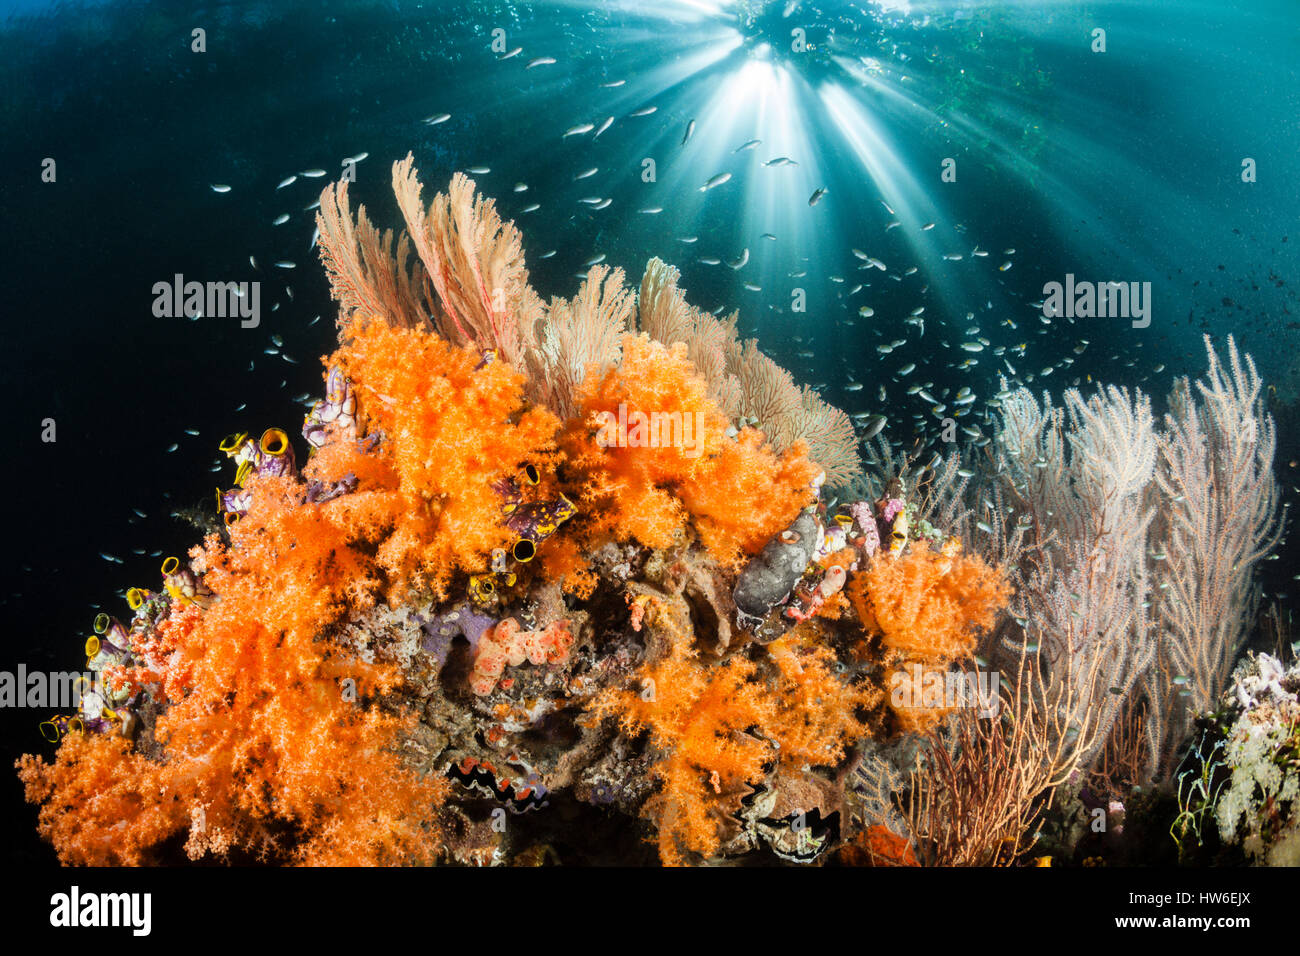 Corals growing near Mangroves, Raja Ampat, West Papua, Indonesia Stock Photo